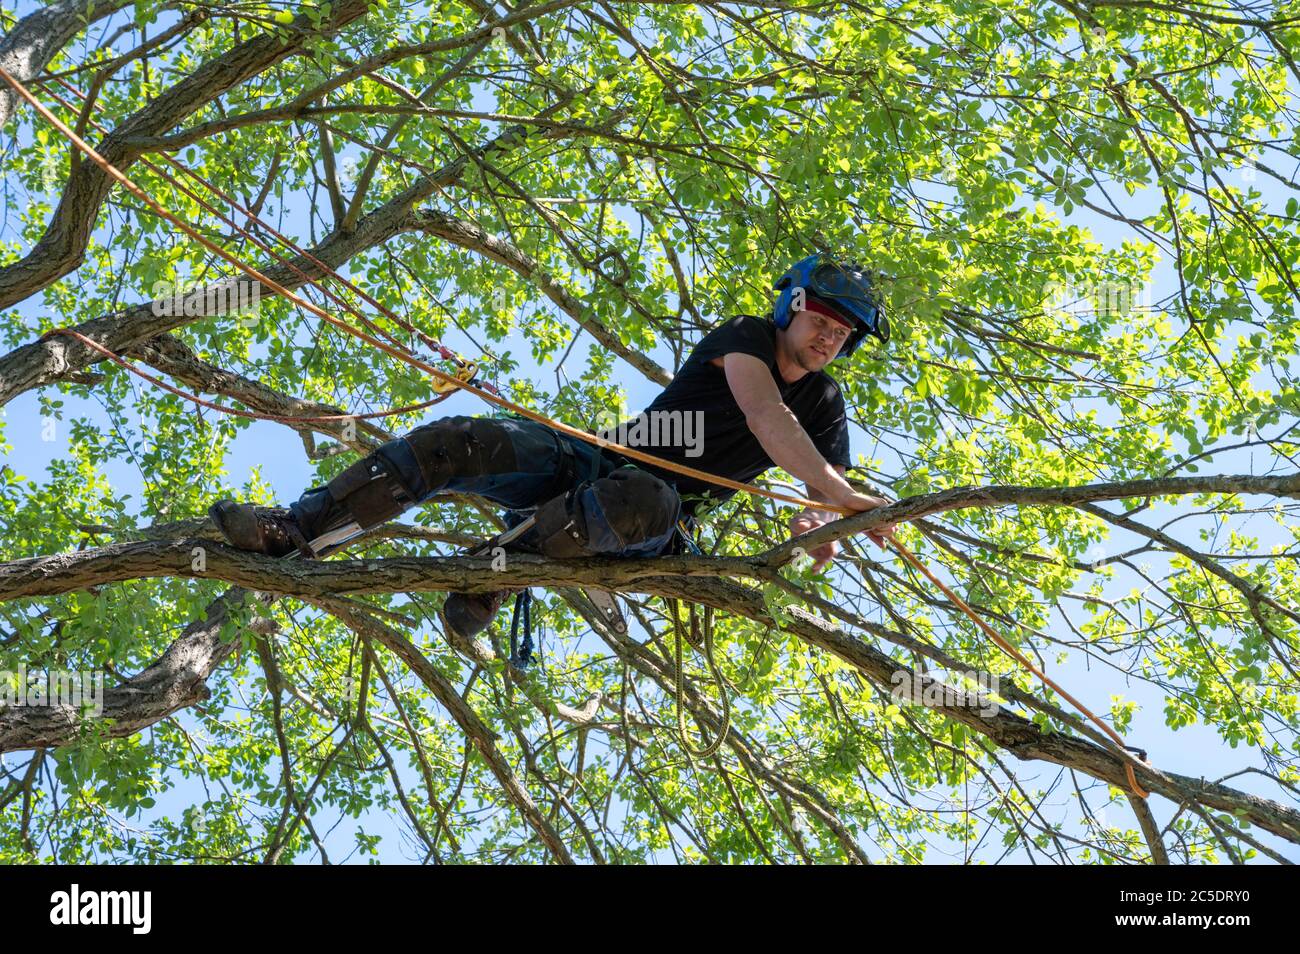 A Tree Surgeon or Arborist tying a rope to a branch ready for cutting. Stock Photo